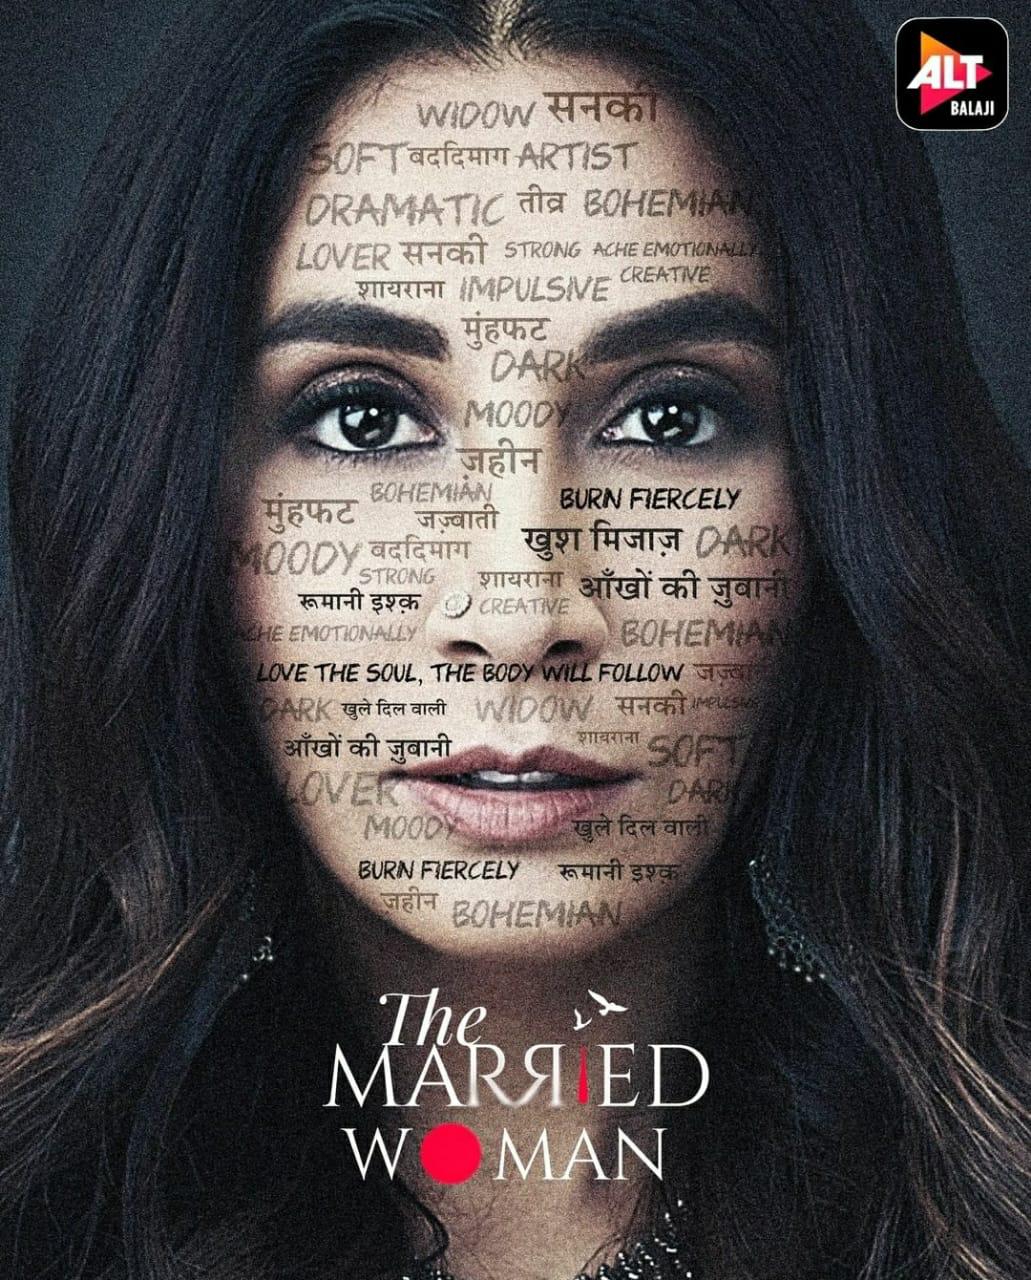 Monica Dogra as Peeplika presents an impulsive and free-spirited outlook towards life in ‘The Married Woman’